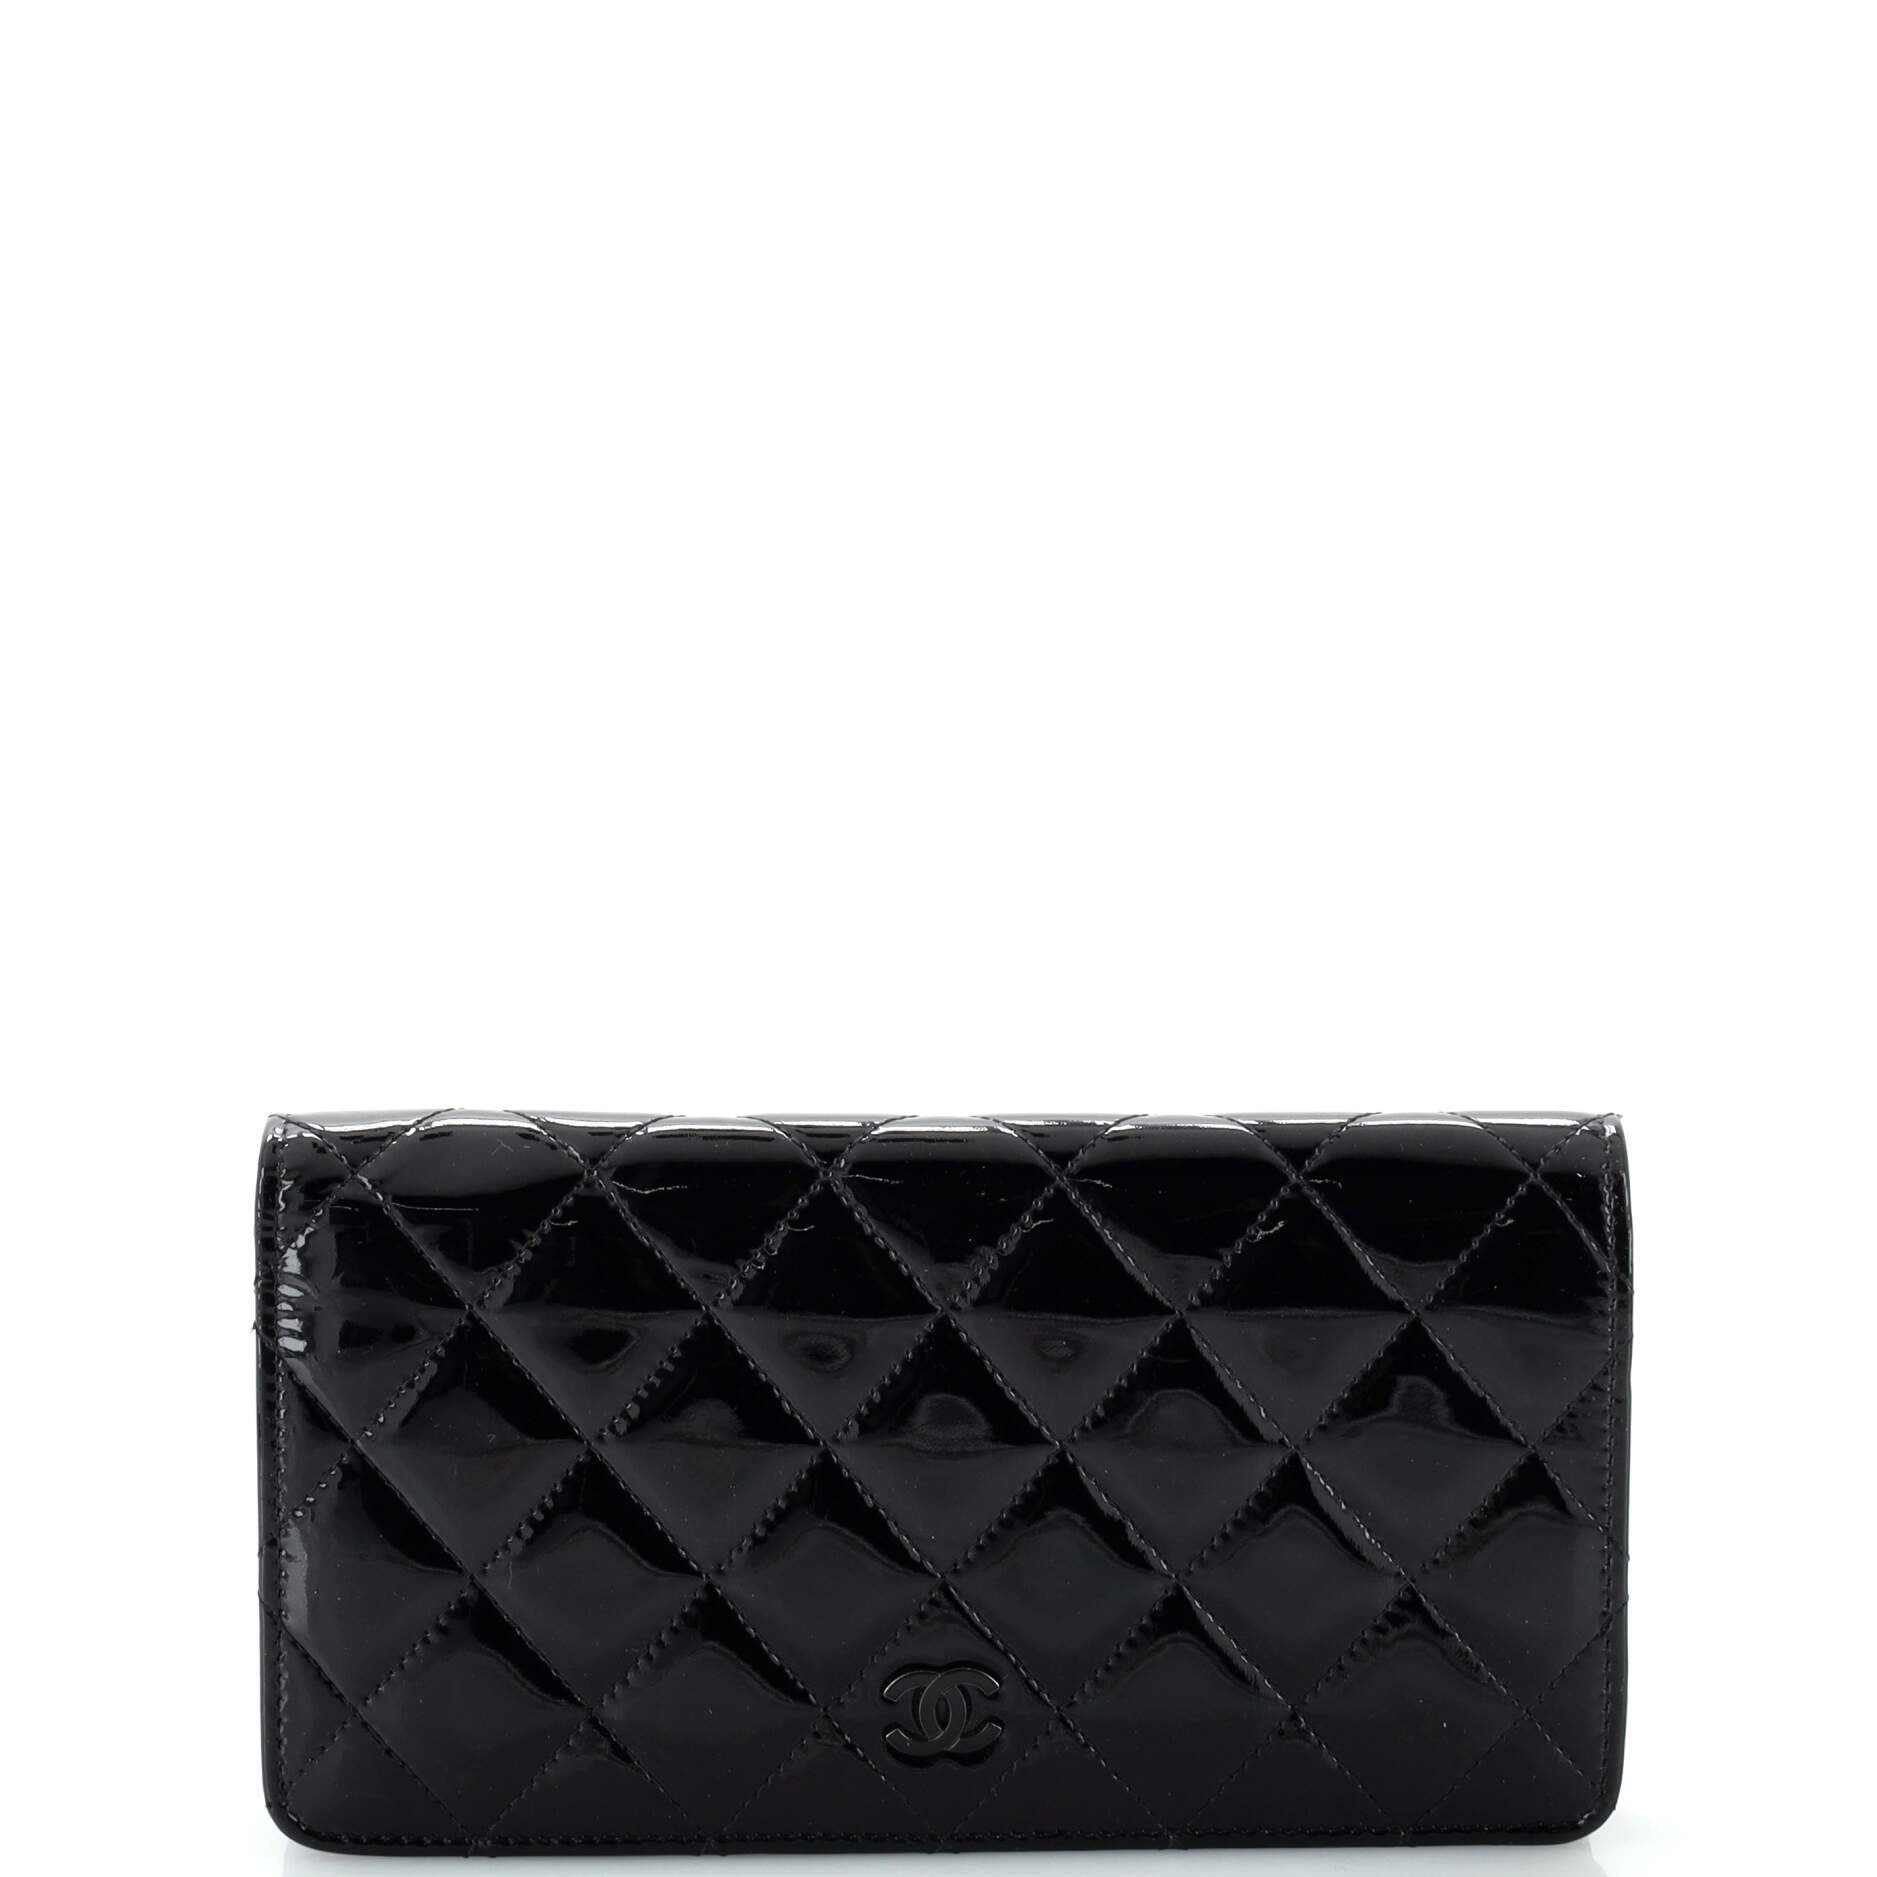 L-Yen Wallet Quilted Striated Metallic Patent Long